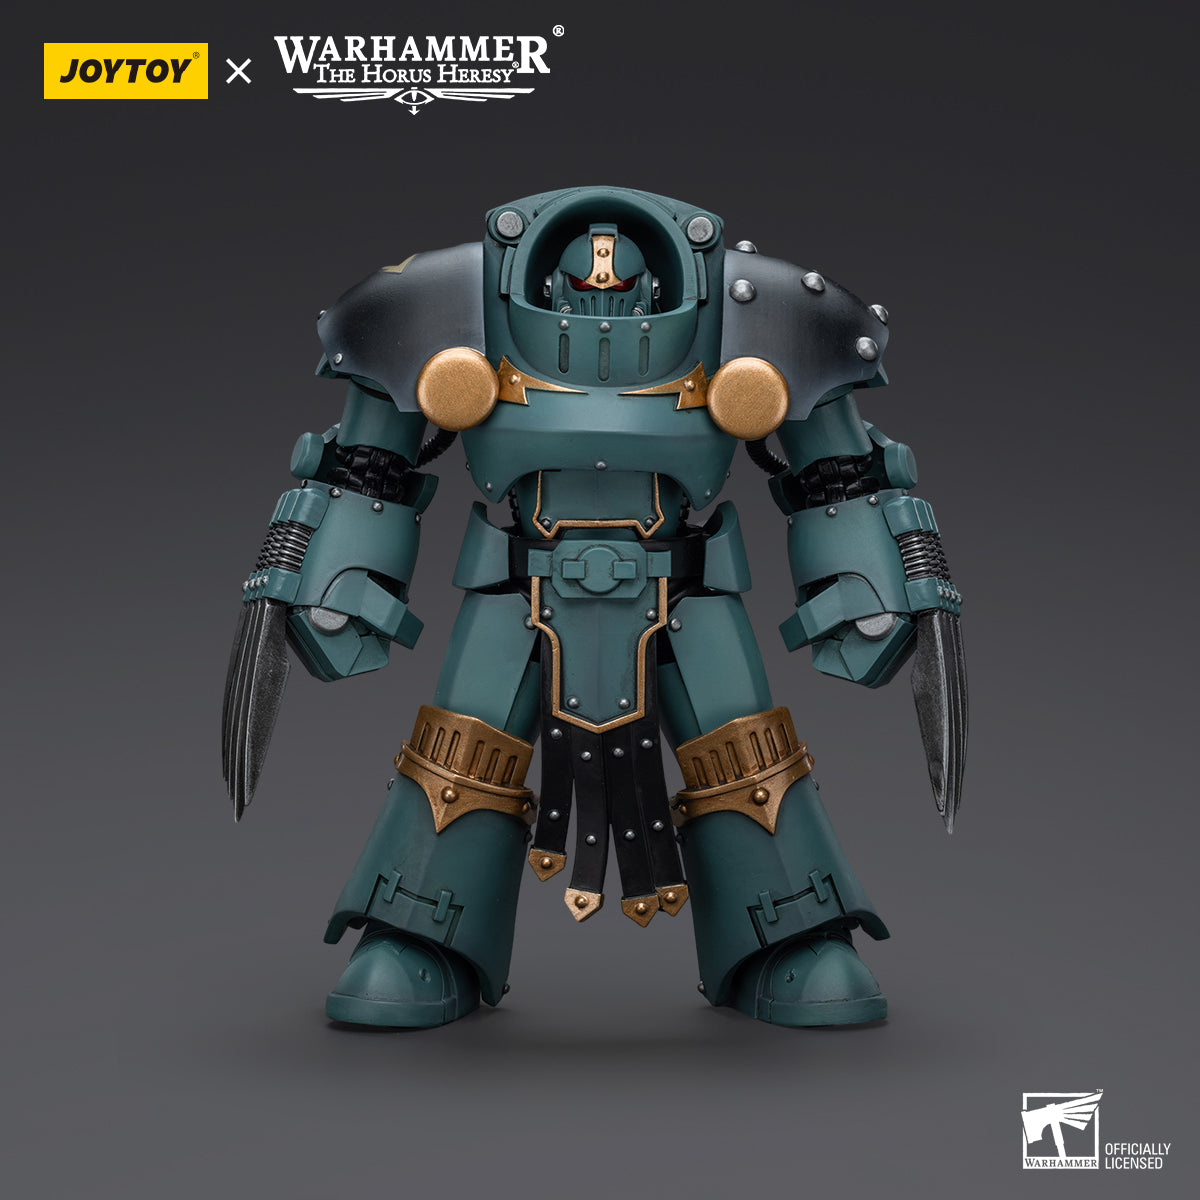 Warhammer Collectibles: 1/18 Scale Sons Of Horus Tartaros Terminator Squad Terminator With Claw (Preorder)